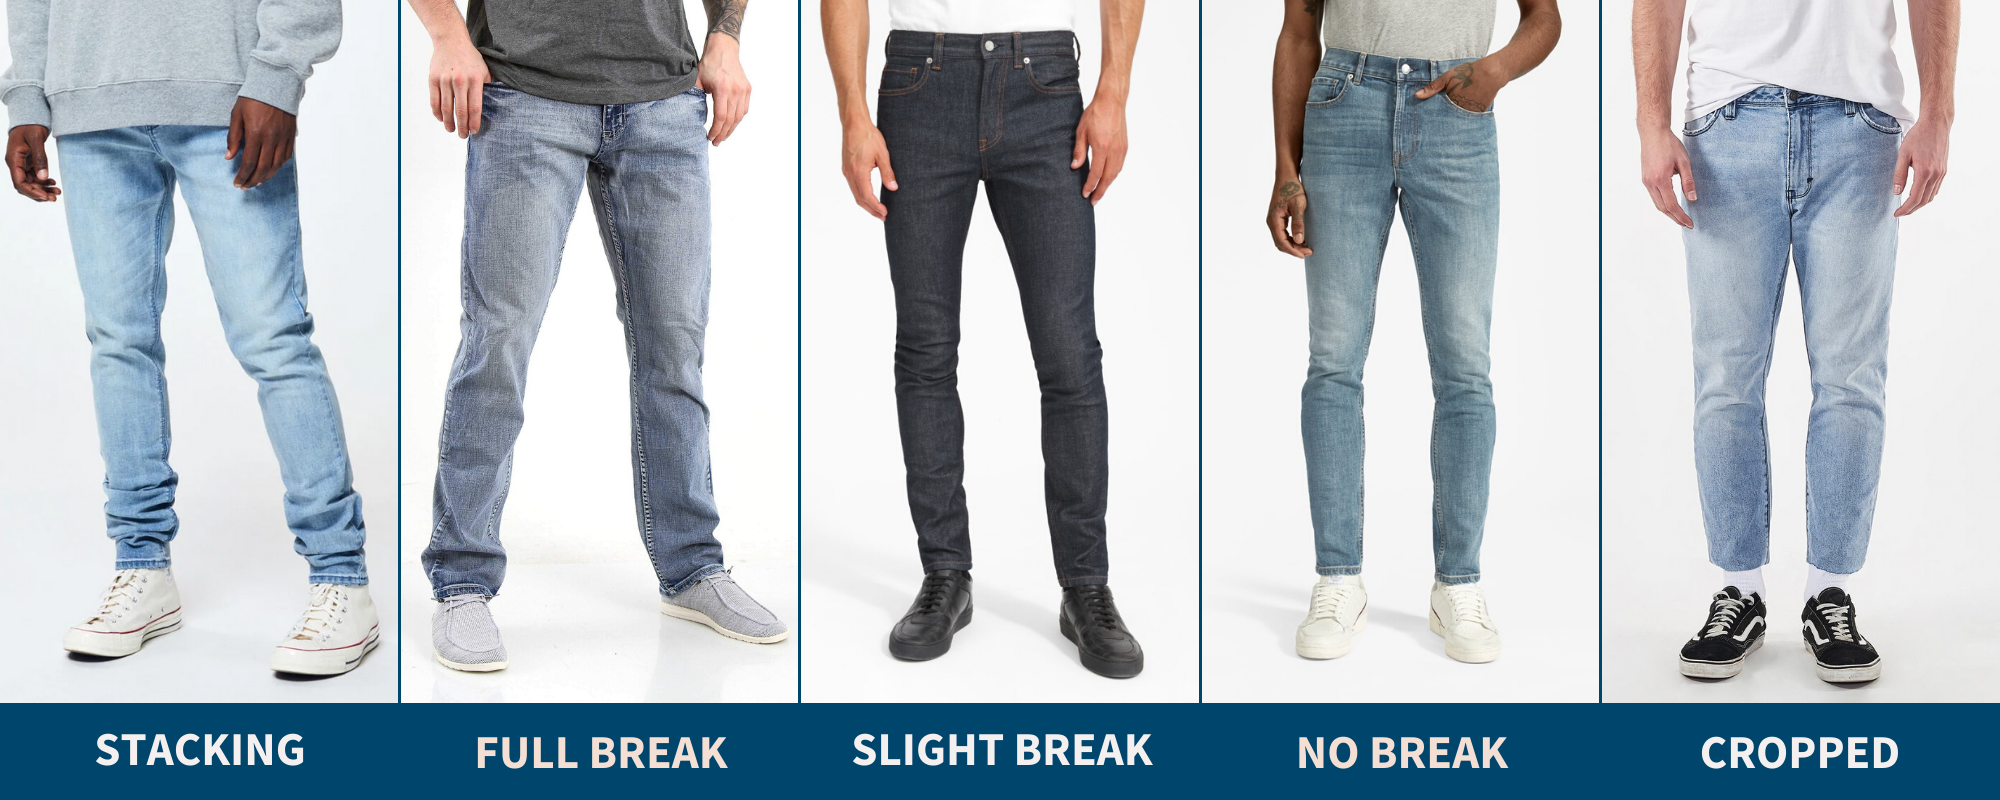 best jeans for men with short legs